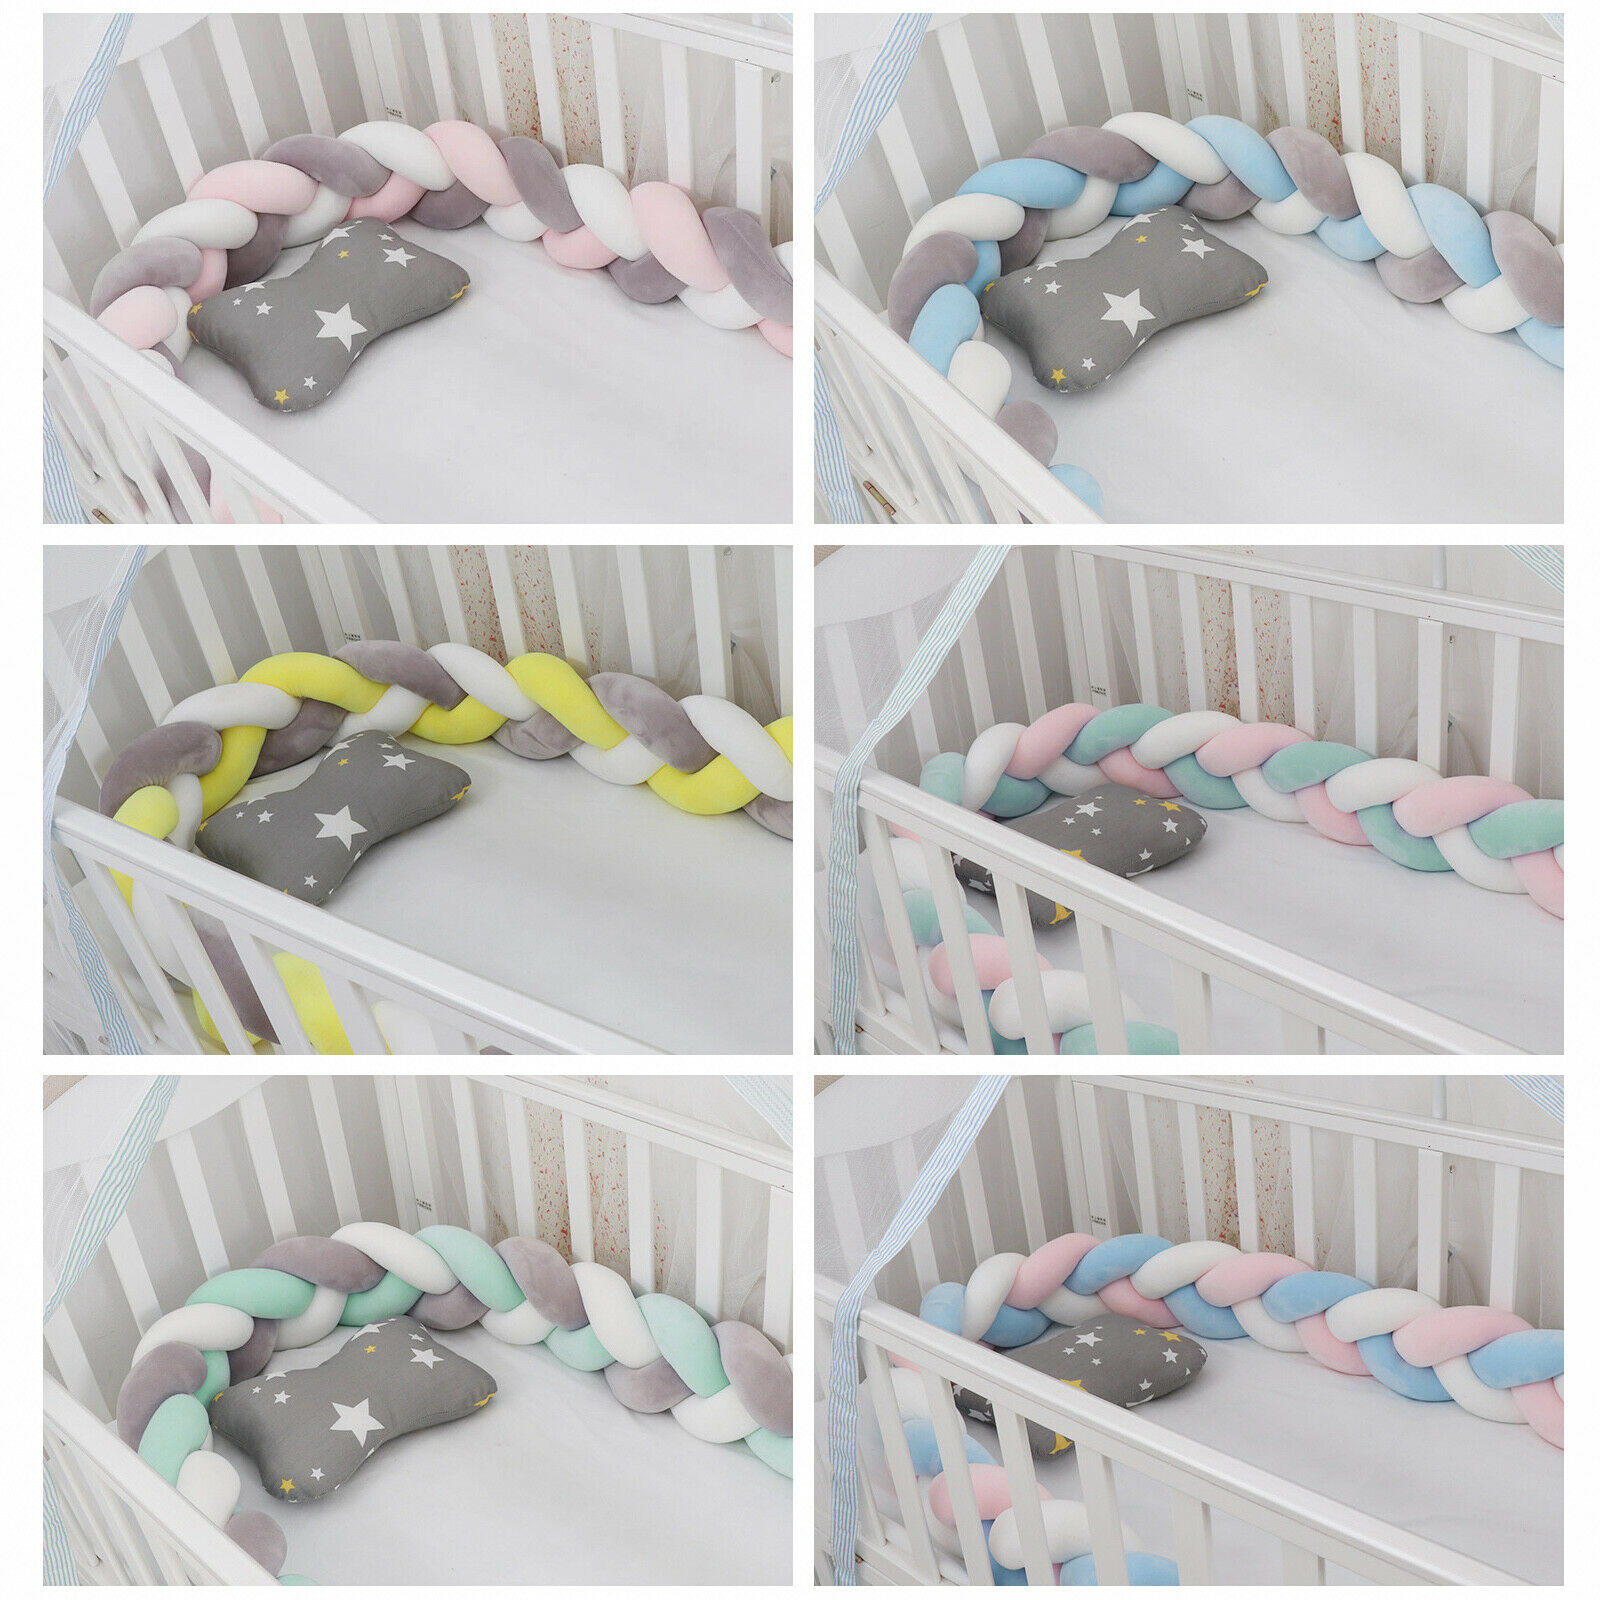 Image 1 - Crib Protector Baby Bed Bumper 3-Strand Knot Newborn Cushions Home Decor Pillow